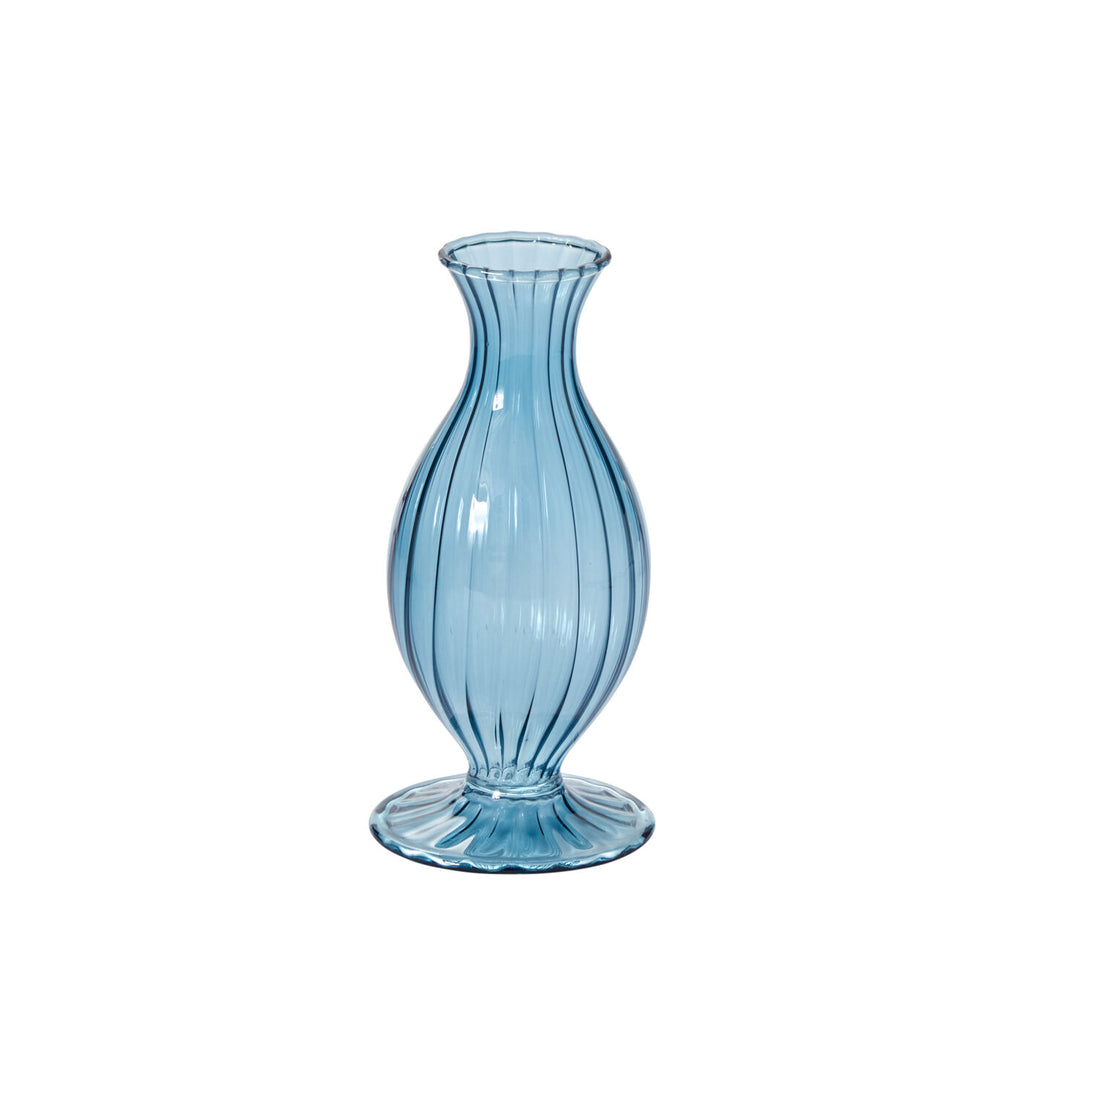 A Blue Vintage Boutique Vase by Accent Decor sitting on top of a table.